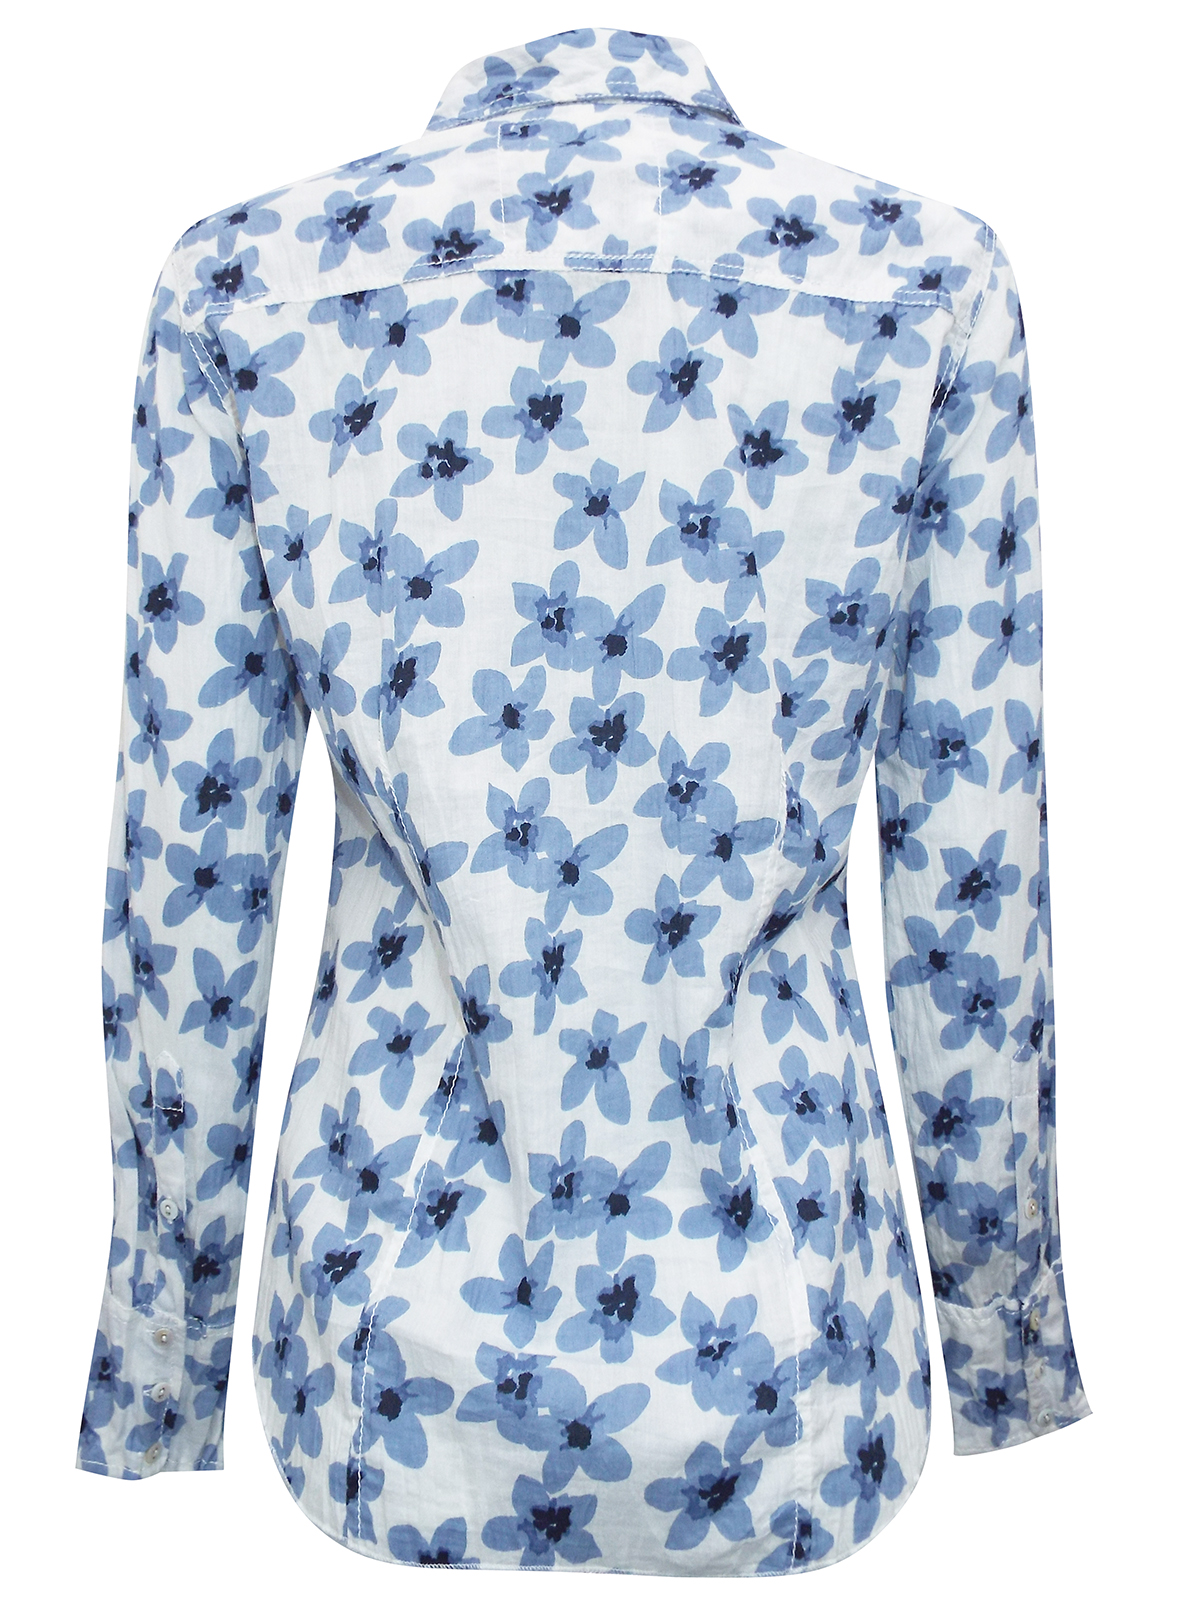 CINO - - CINO BLUE Floral Print Pure Cotton Crinkle Shirt - Size 8 to ...